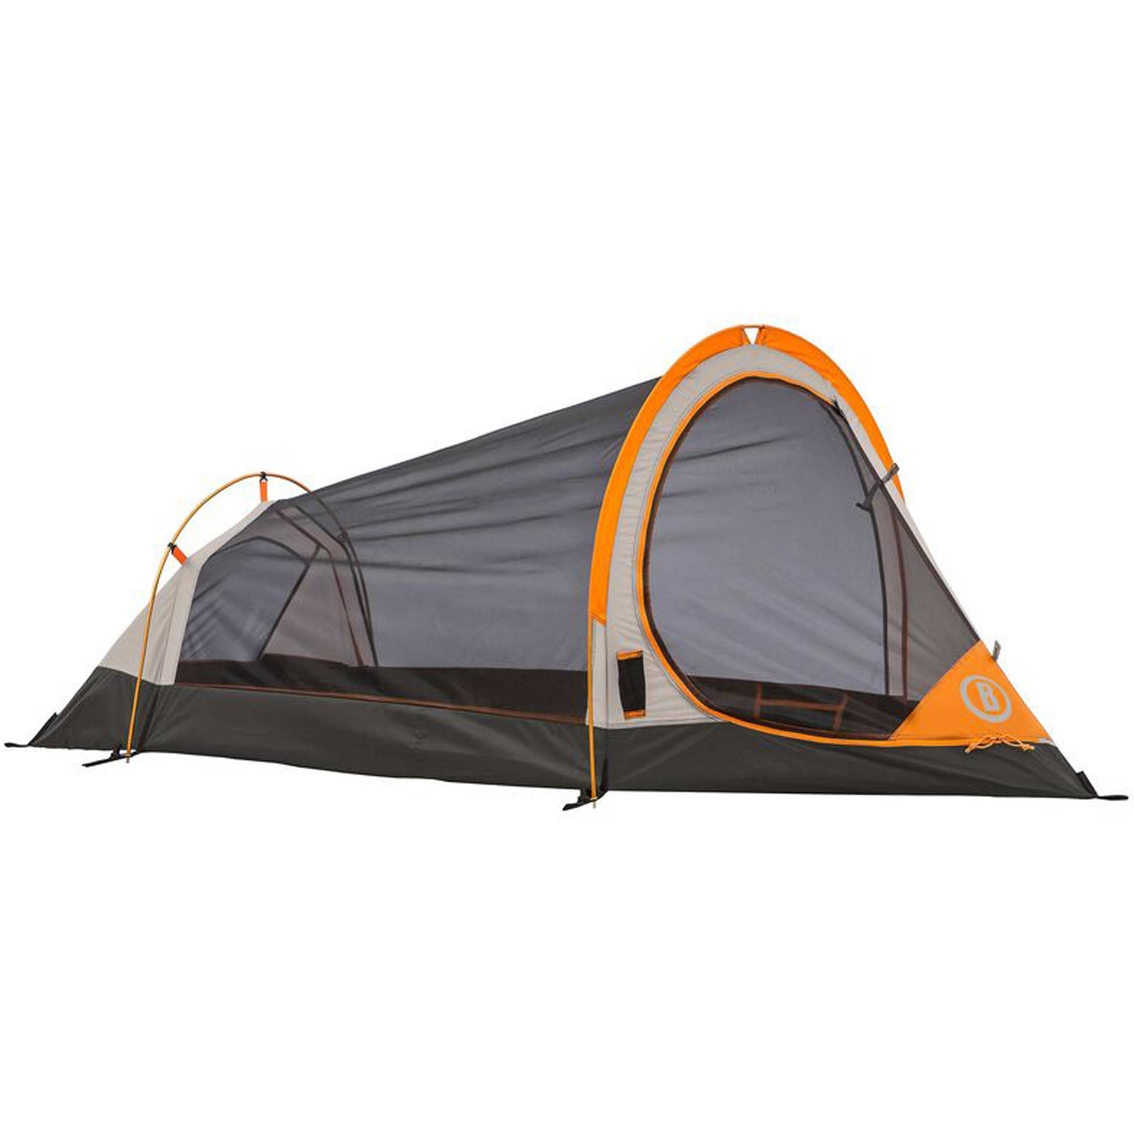 Bushnell 1 Person Backpacking Tent - Image 2 of 7